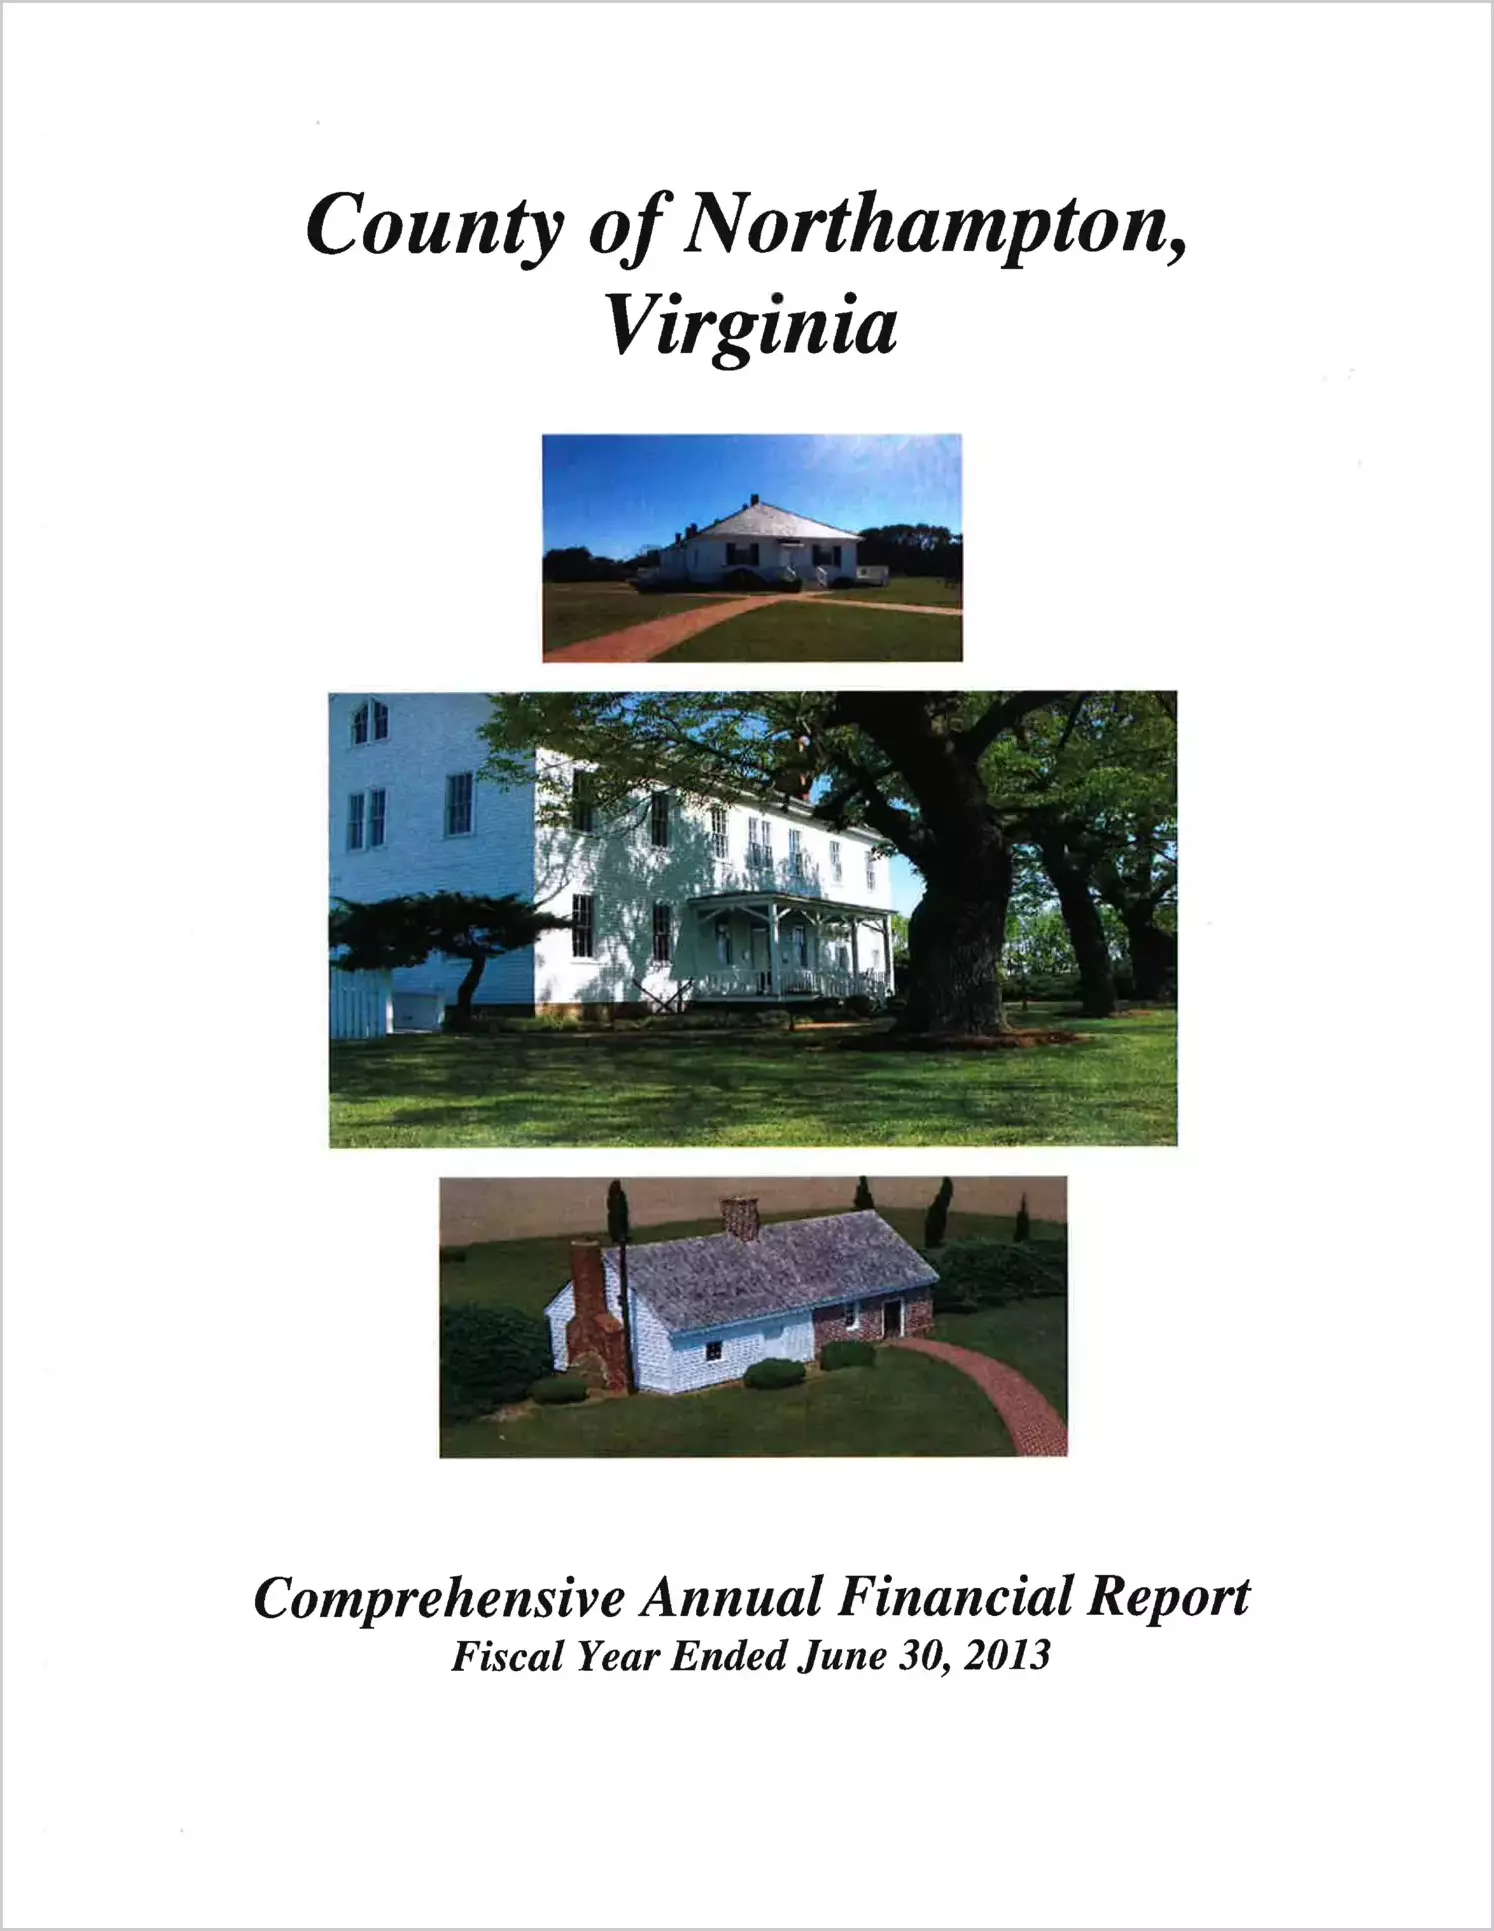 2013 Annual Financial Report for County of Northampton